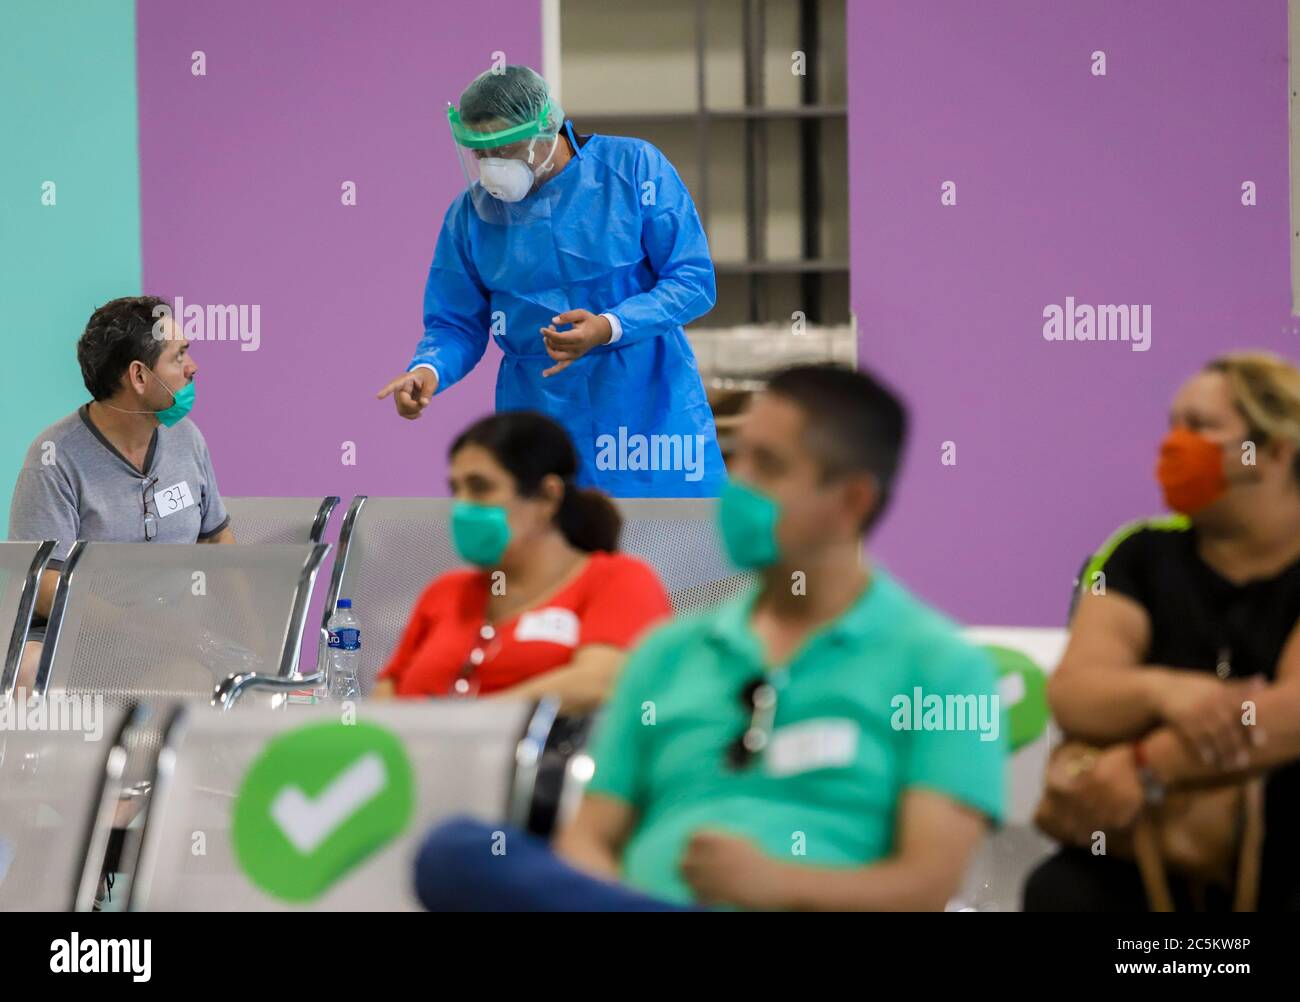 HERMOSILLO, MEXICO - JULY 3: Medical and health personnel carry out rapid tests and follow-up on people who present symptoms of covid-19 in the facilities of the Arena Sonora, which has led to the red alert due to the increase in cases in the state of Sonora on July 3, 2020 in Hermosillo, Mexico. (Luis Gutierrez/Norte Photo/). Stock Photo